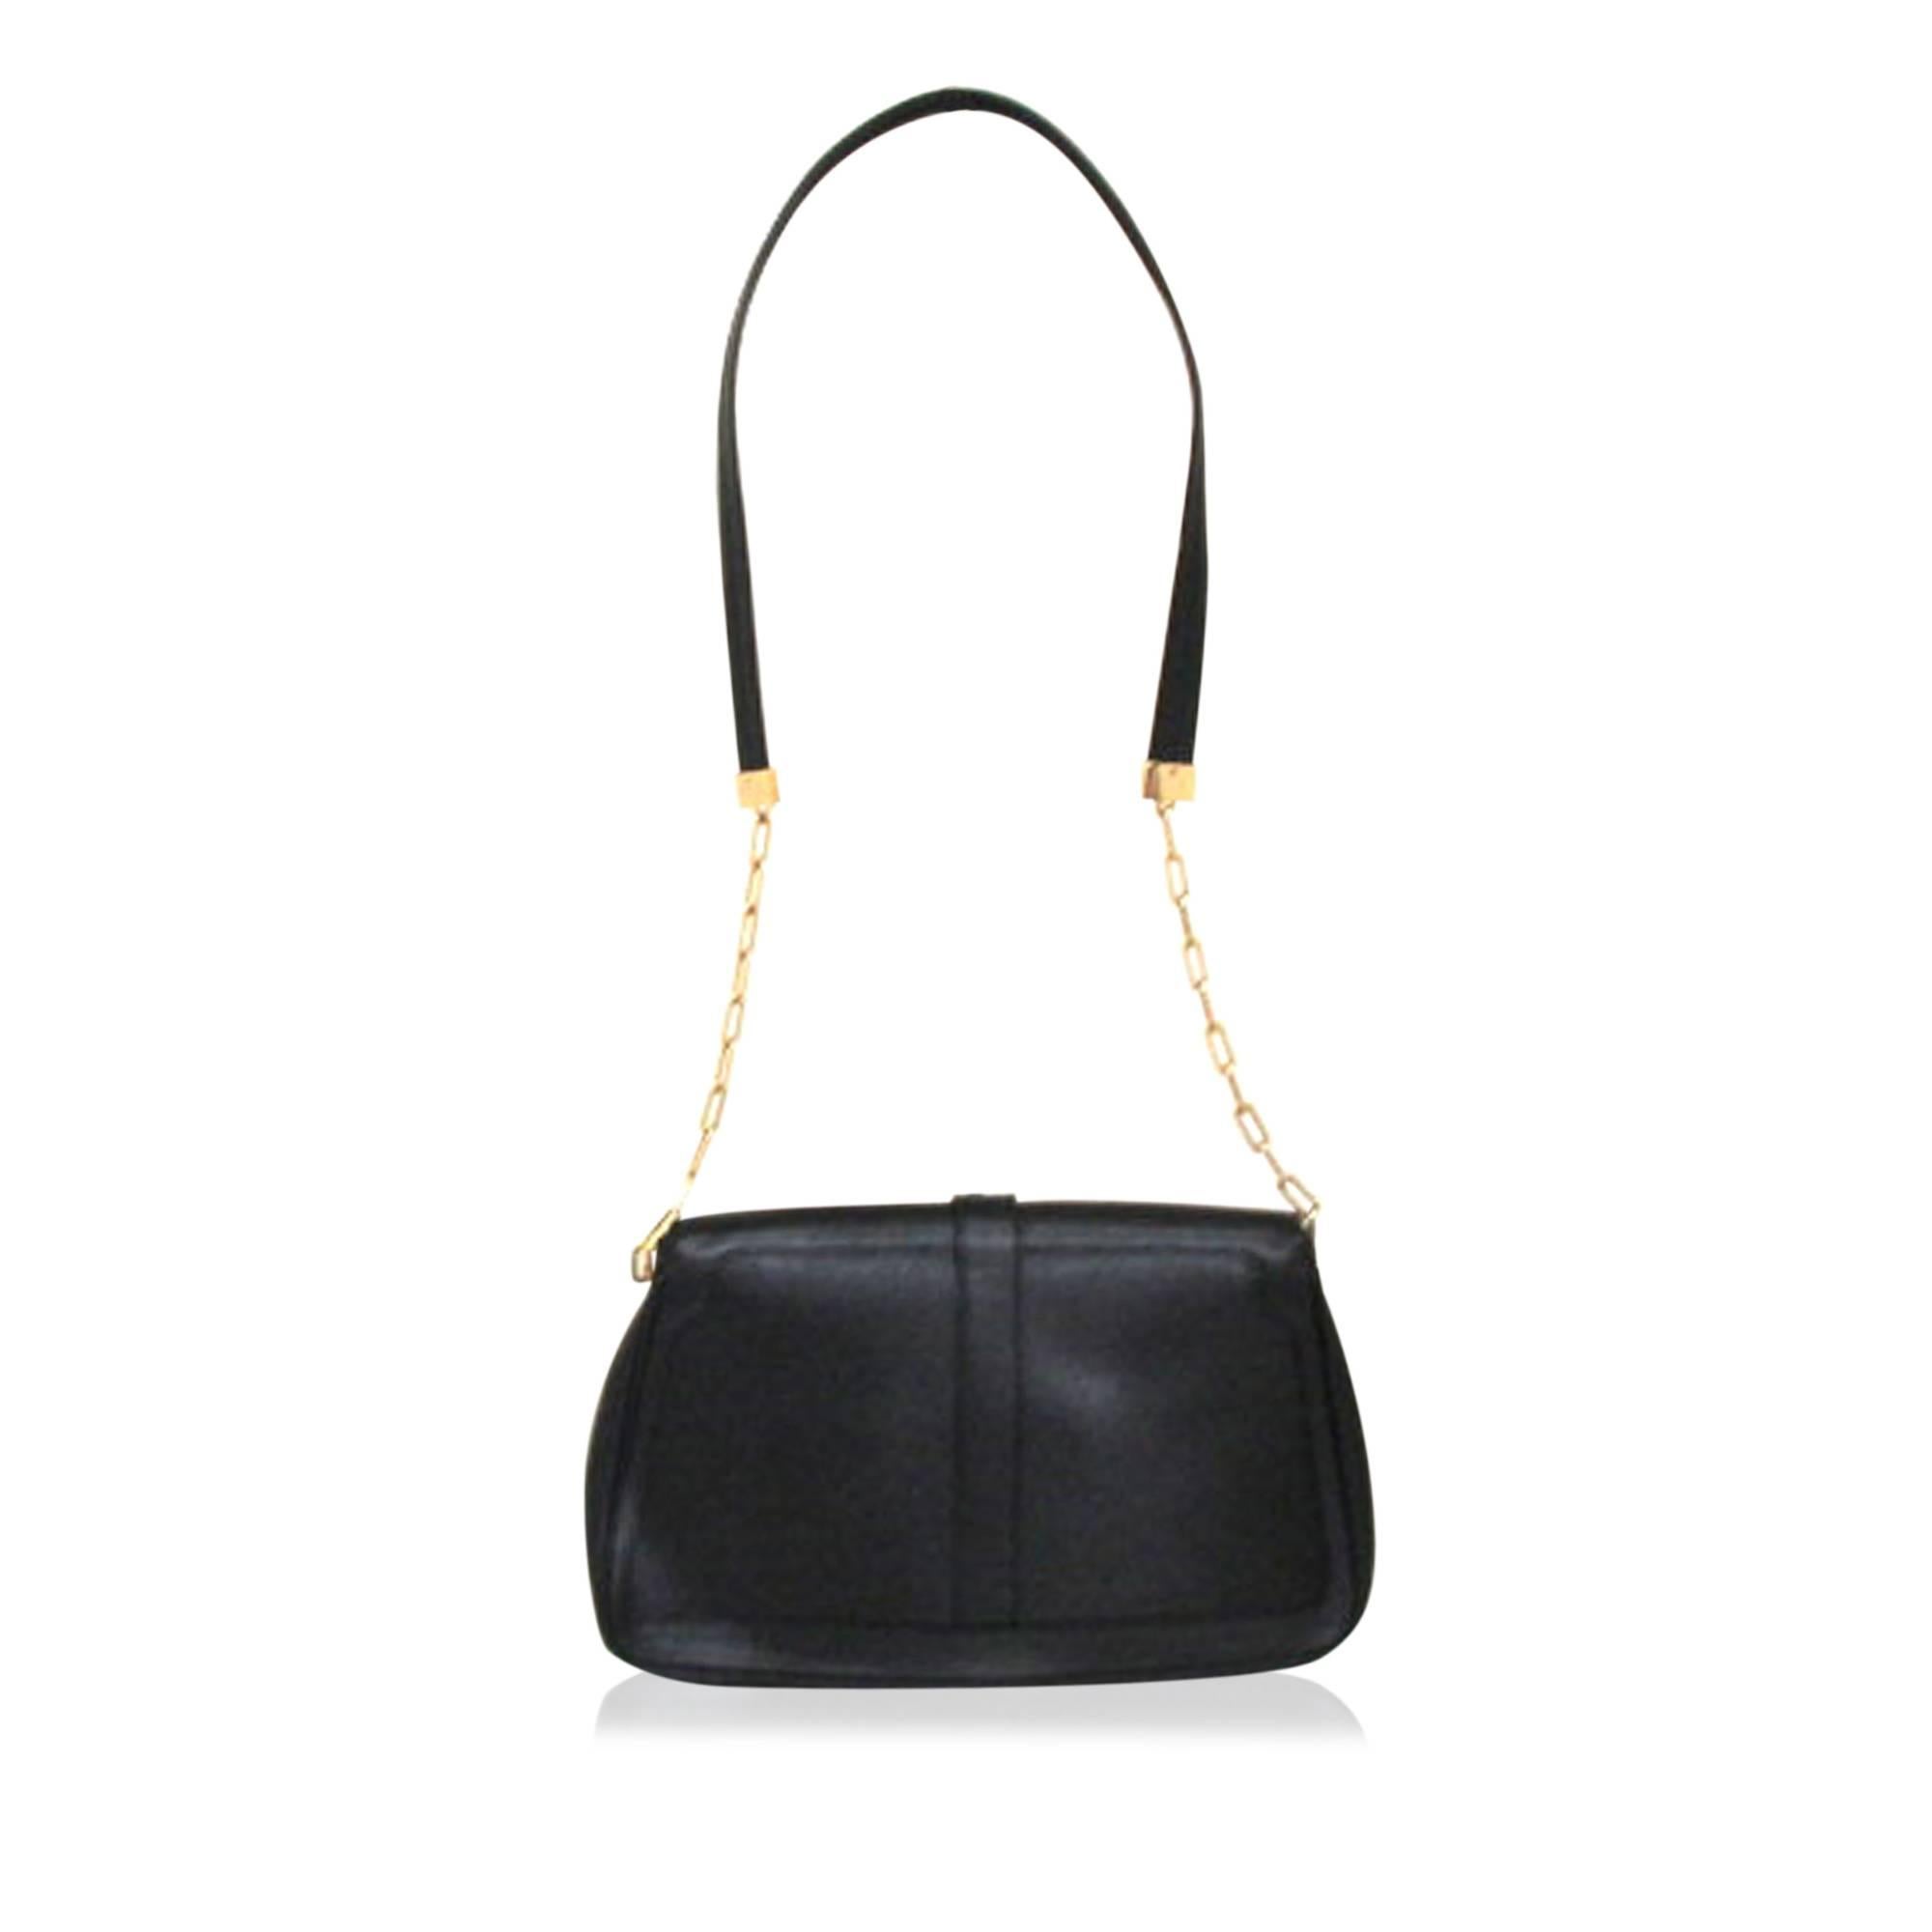 Product details:  Black leather shoulder bag by Gucci.  Leather and chain shoulder strap.  Front flap with magnetic snap closure.  Dual exterior zip pockets.  Lined interior with inner zip pocket.  Goldtone hardware.  12.25